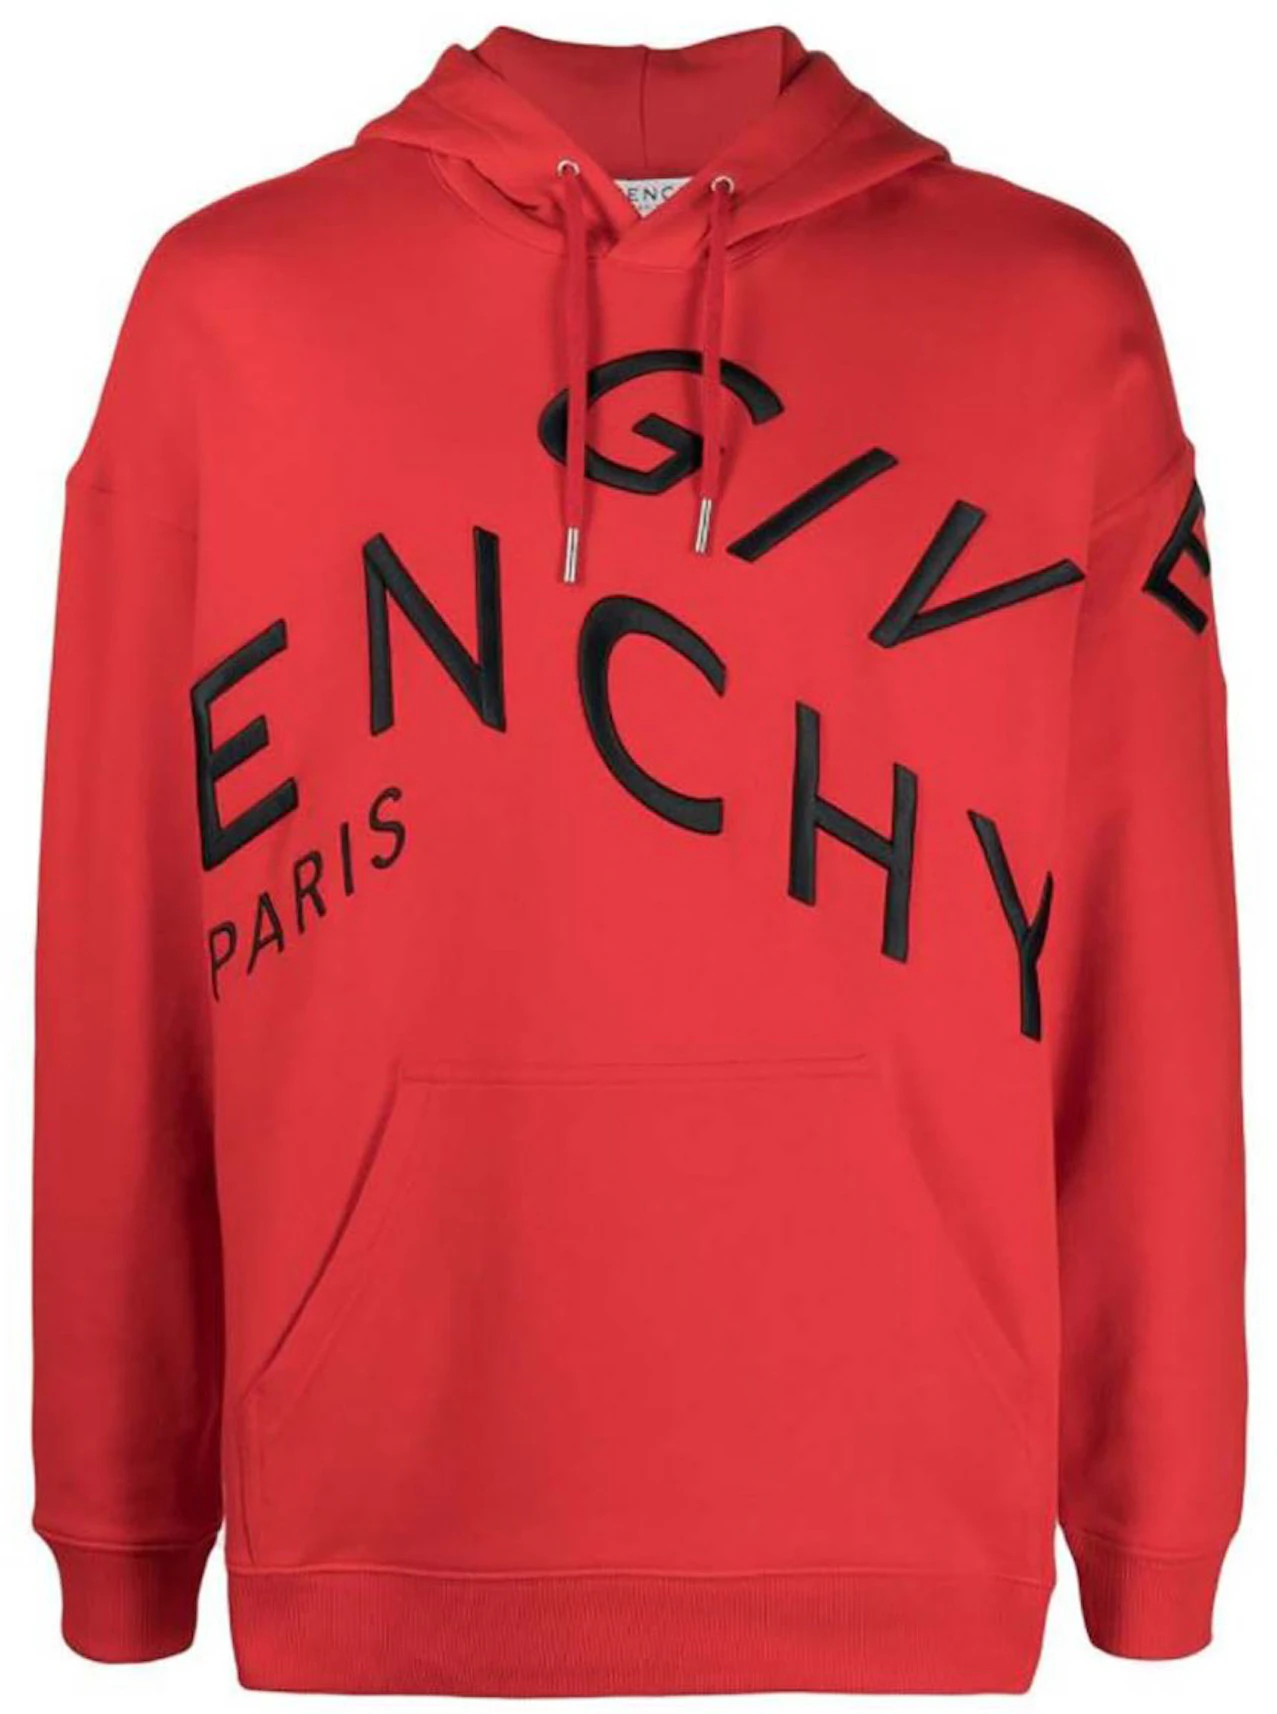 Givenchy Refracted Embroidered Logo Hoodie Red/Black - GB